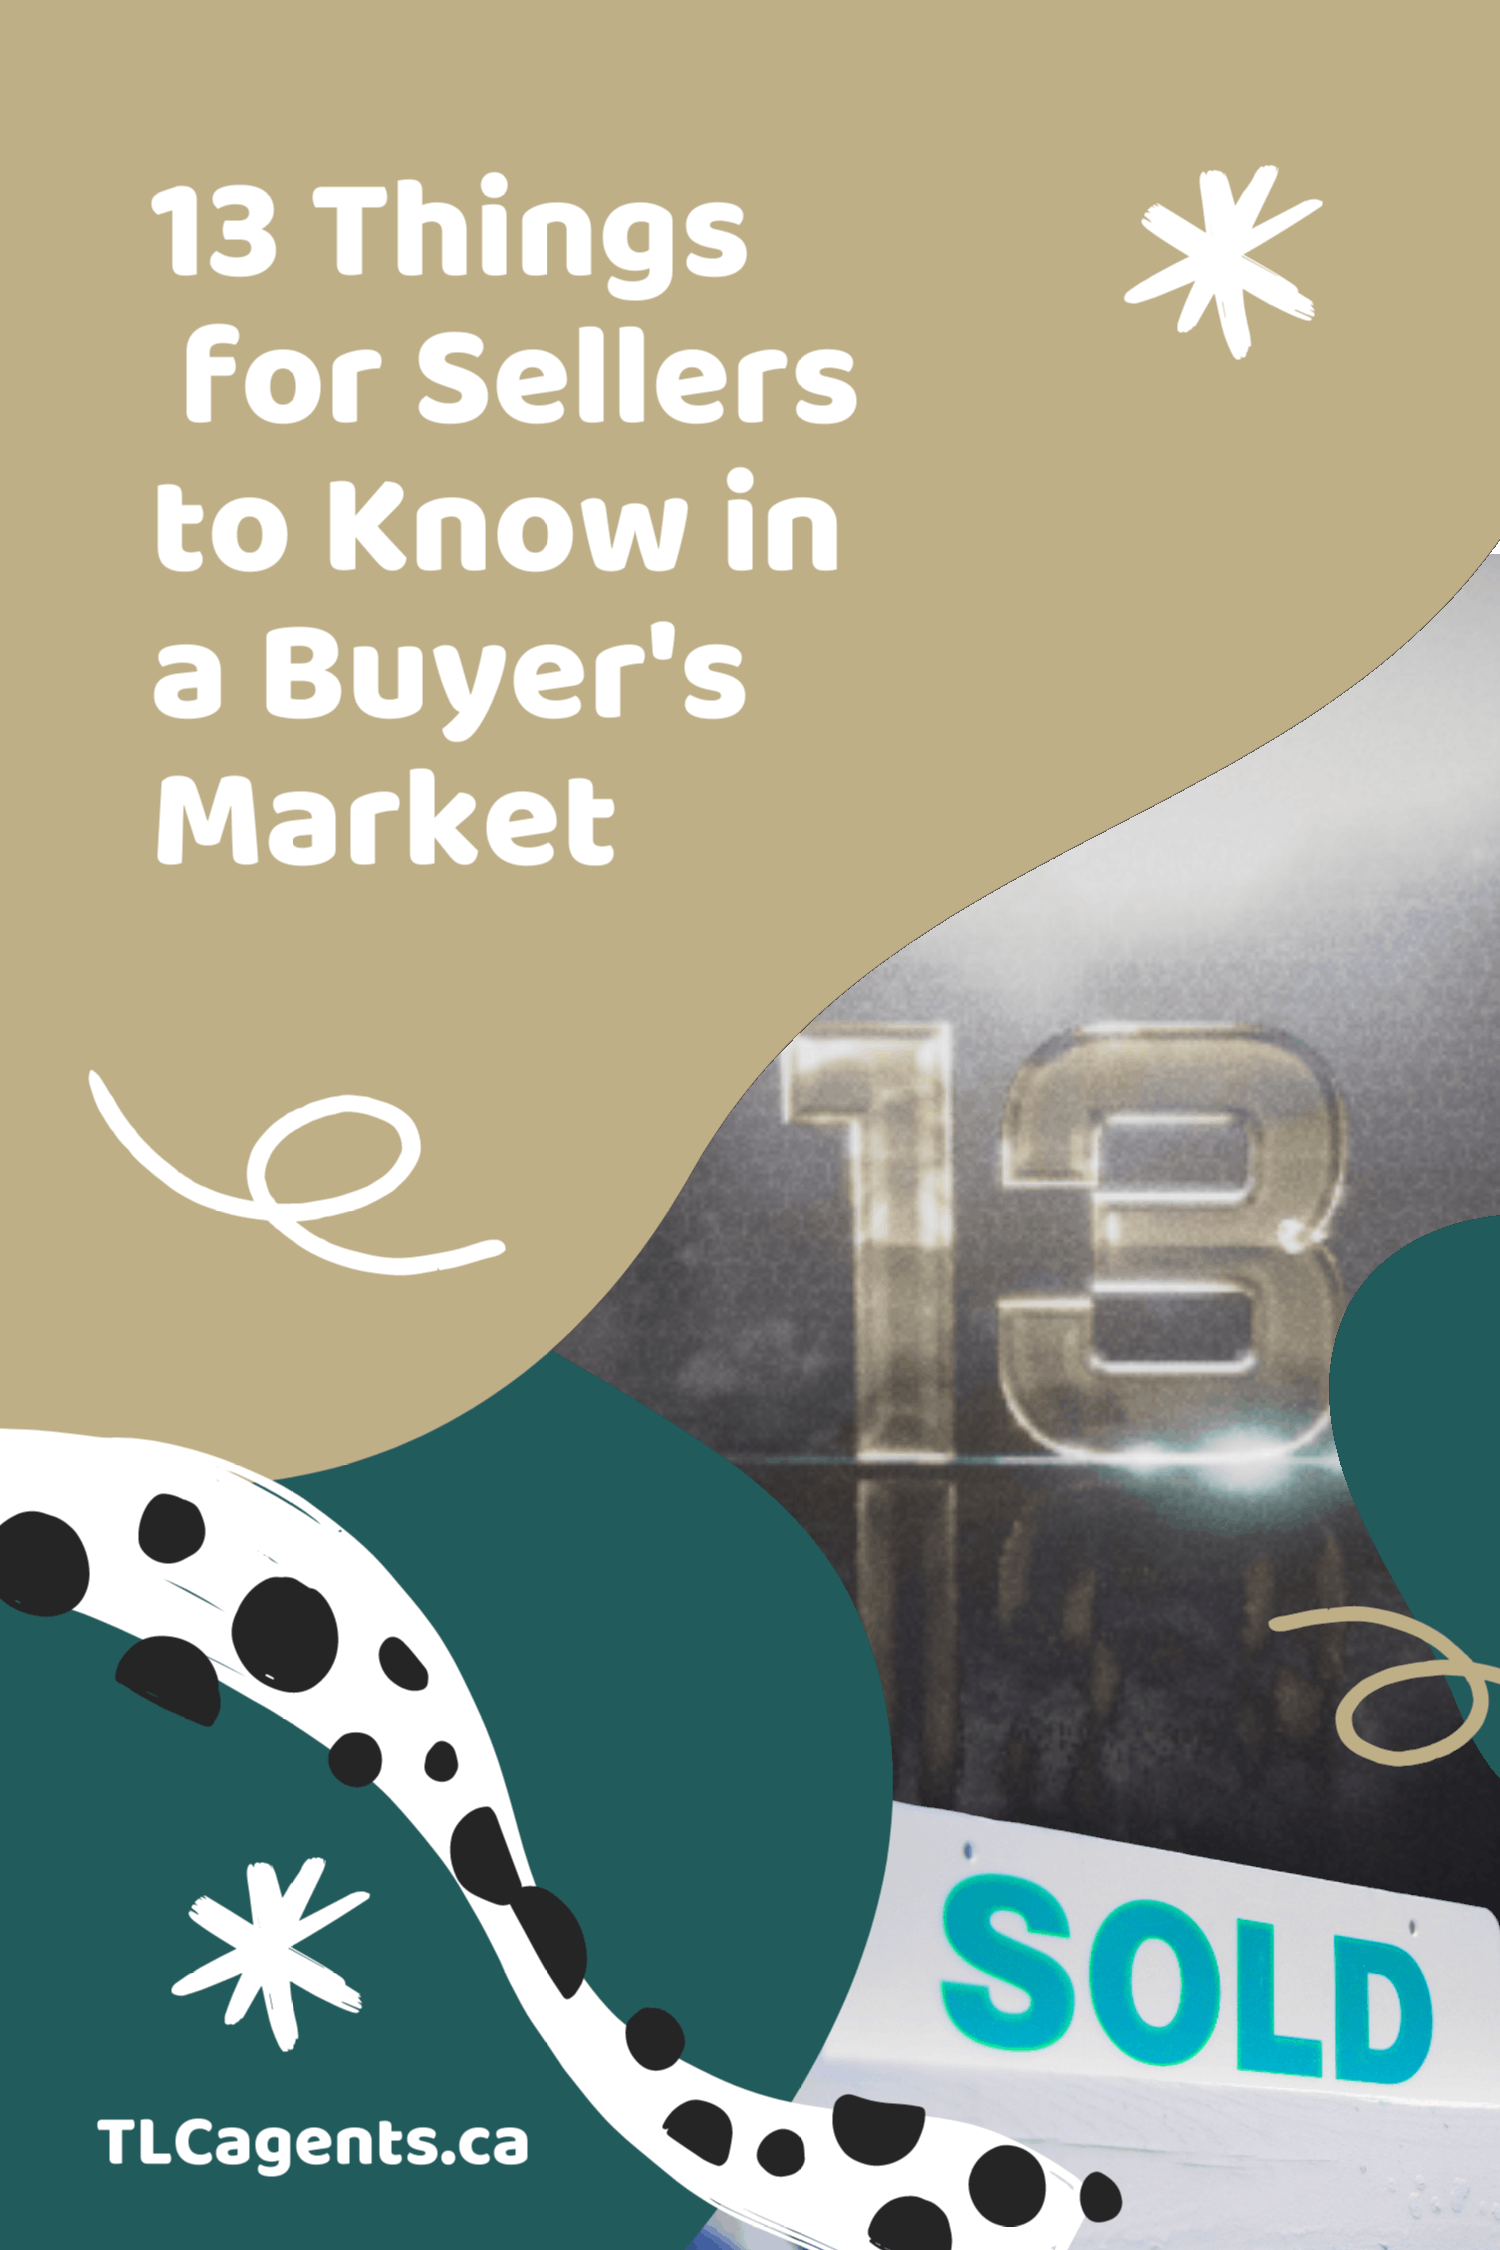 13 Things for Sellers to Know in a Buyer's Market